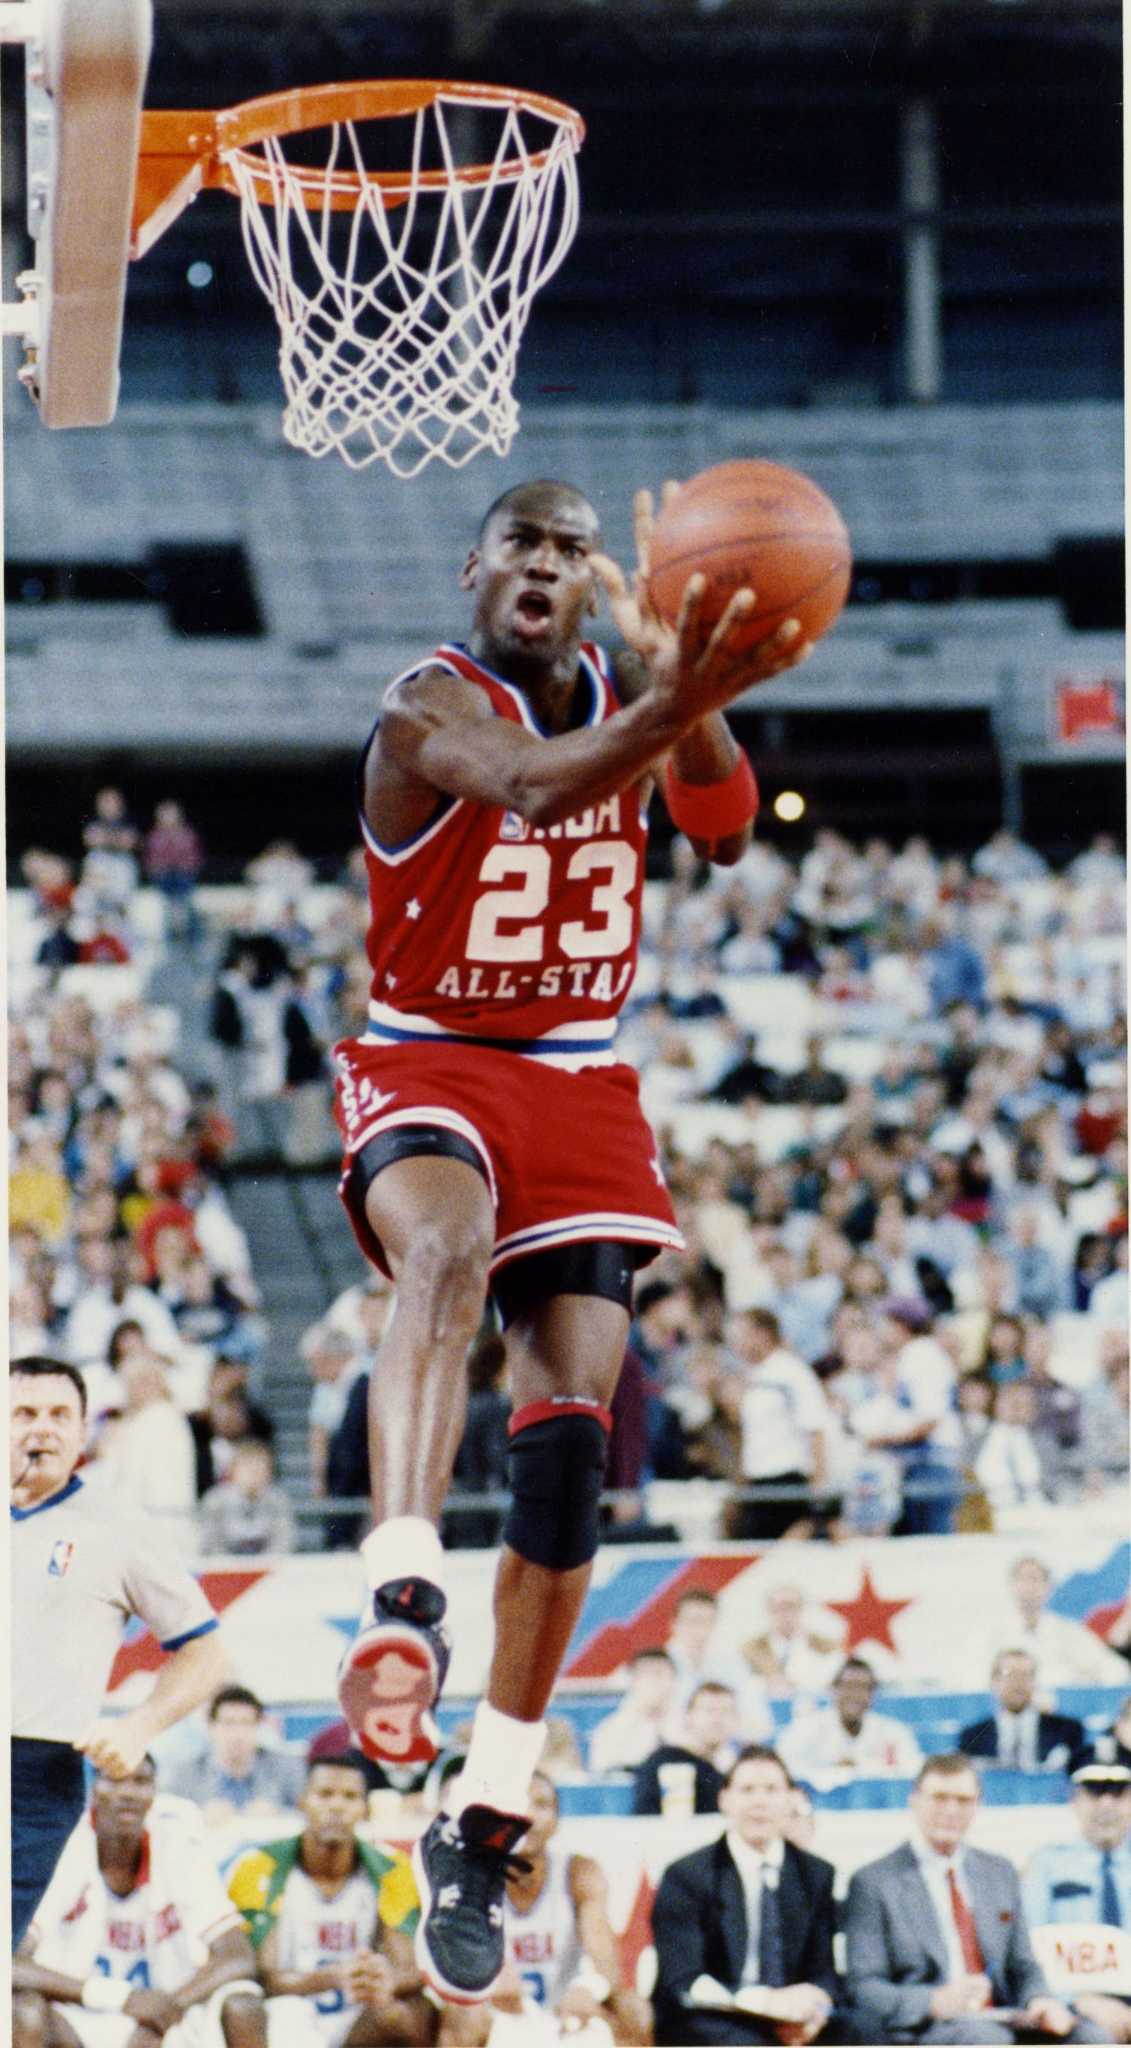 1989 NBA All-Star Game at Houston's 